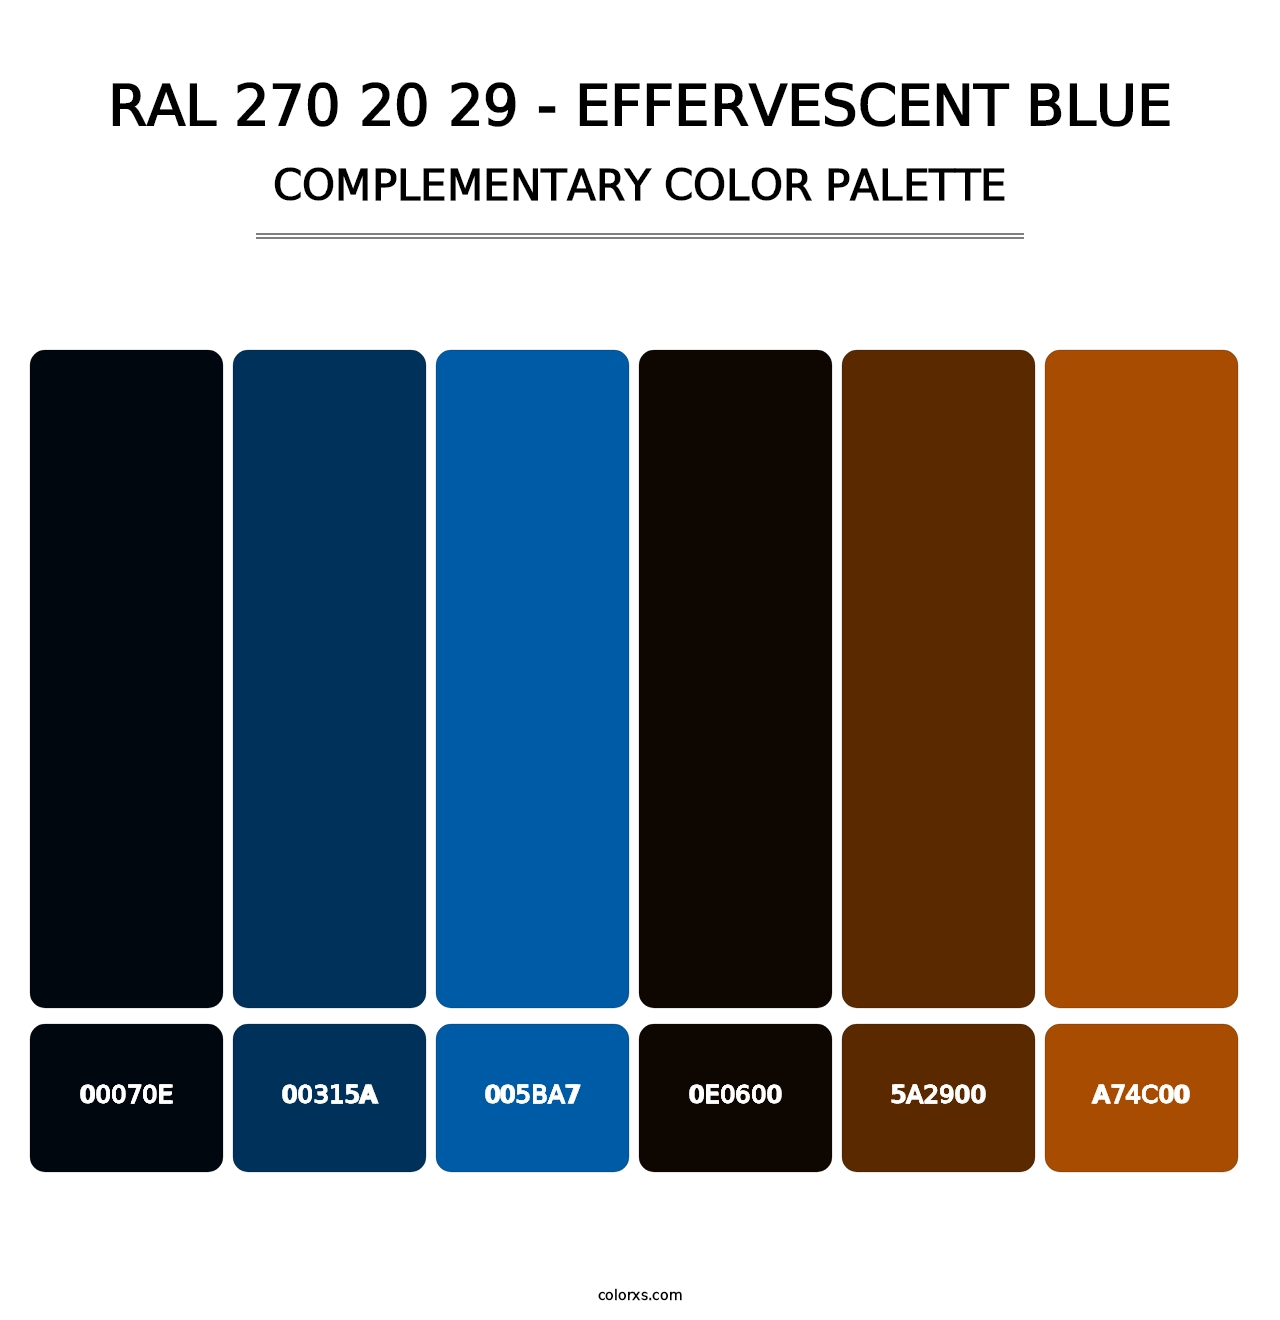 RAL 270 20 29 - Effervescent Blue - Complementary Color Palette